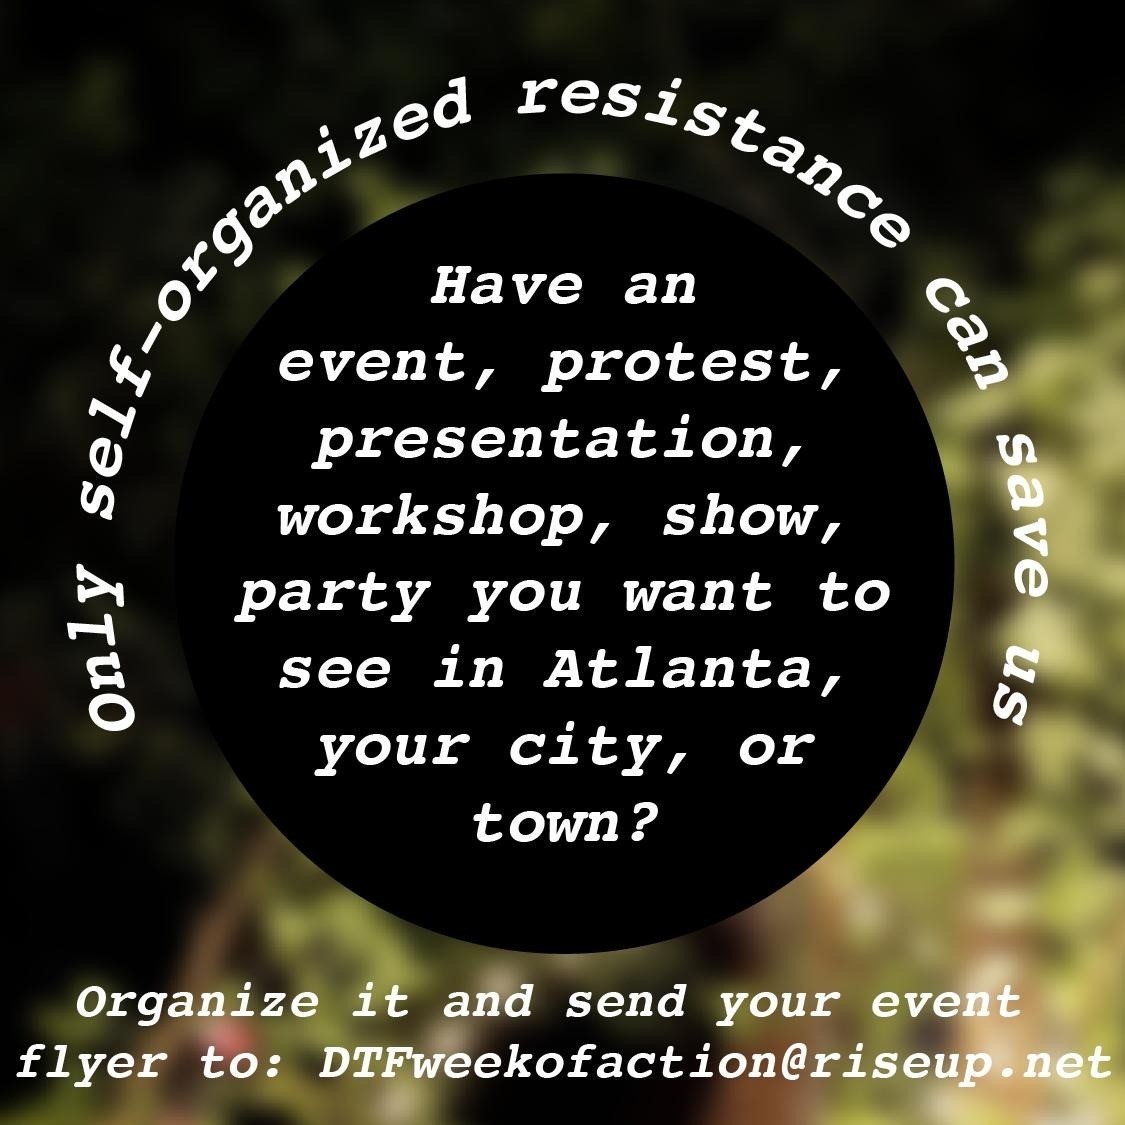 white text over a blurry background of shrubbery reads: "only self-organized resistance can save us. have an event, protest, presentation, workshop, show, party you want to see in atlanta, your city, or town? Organize it and send your event flyer to: DTFweekofaction@riseup.net"